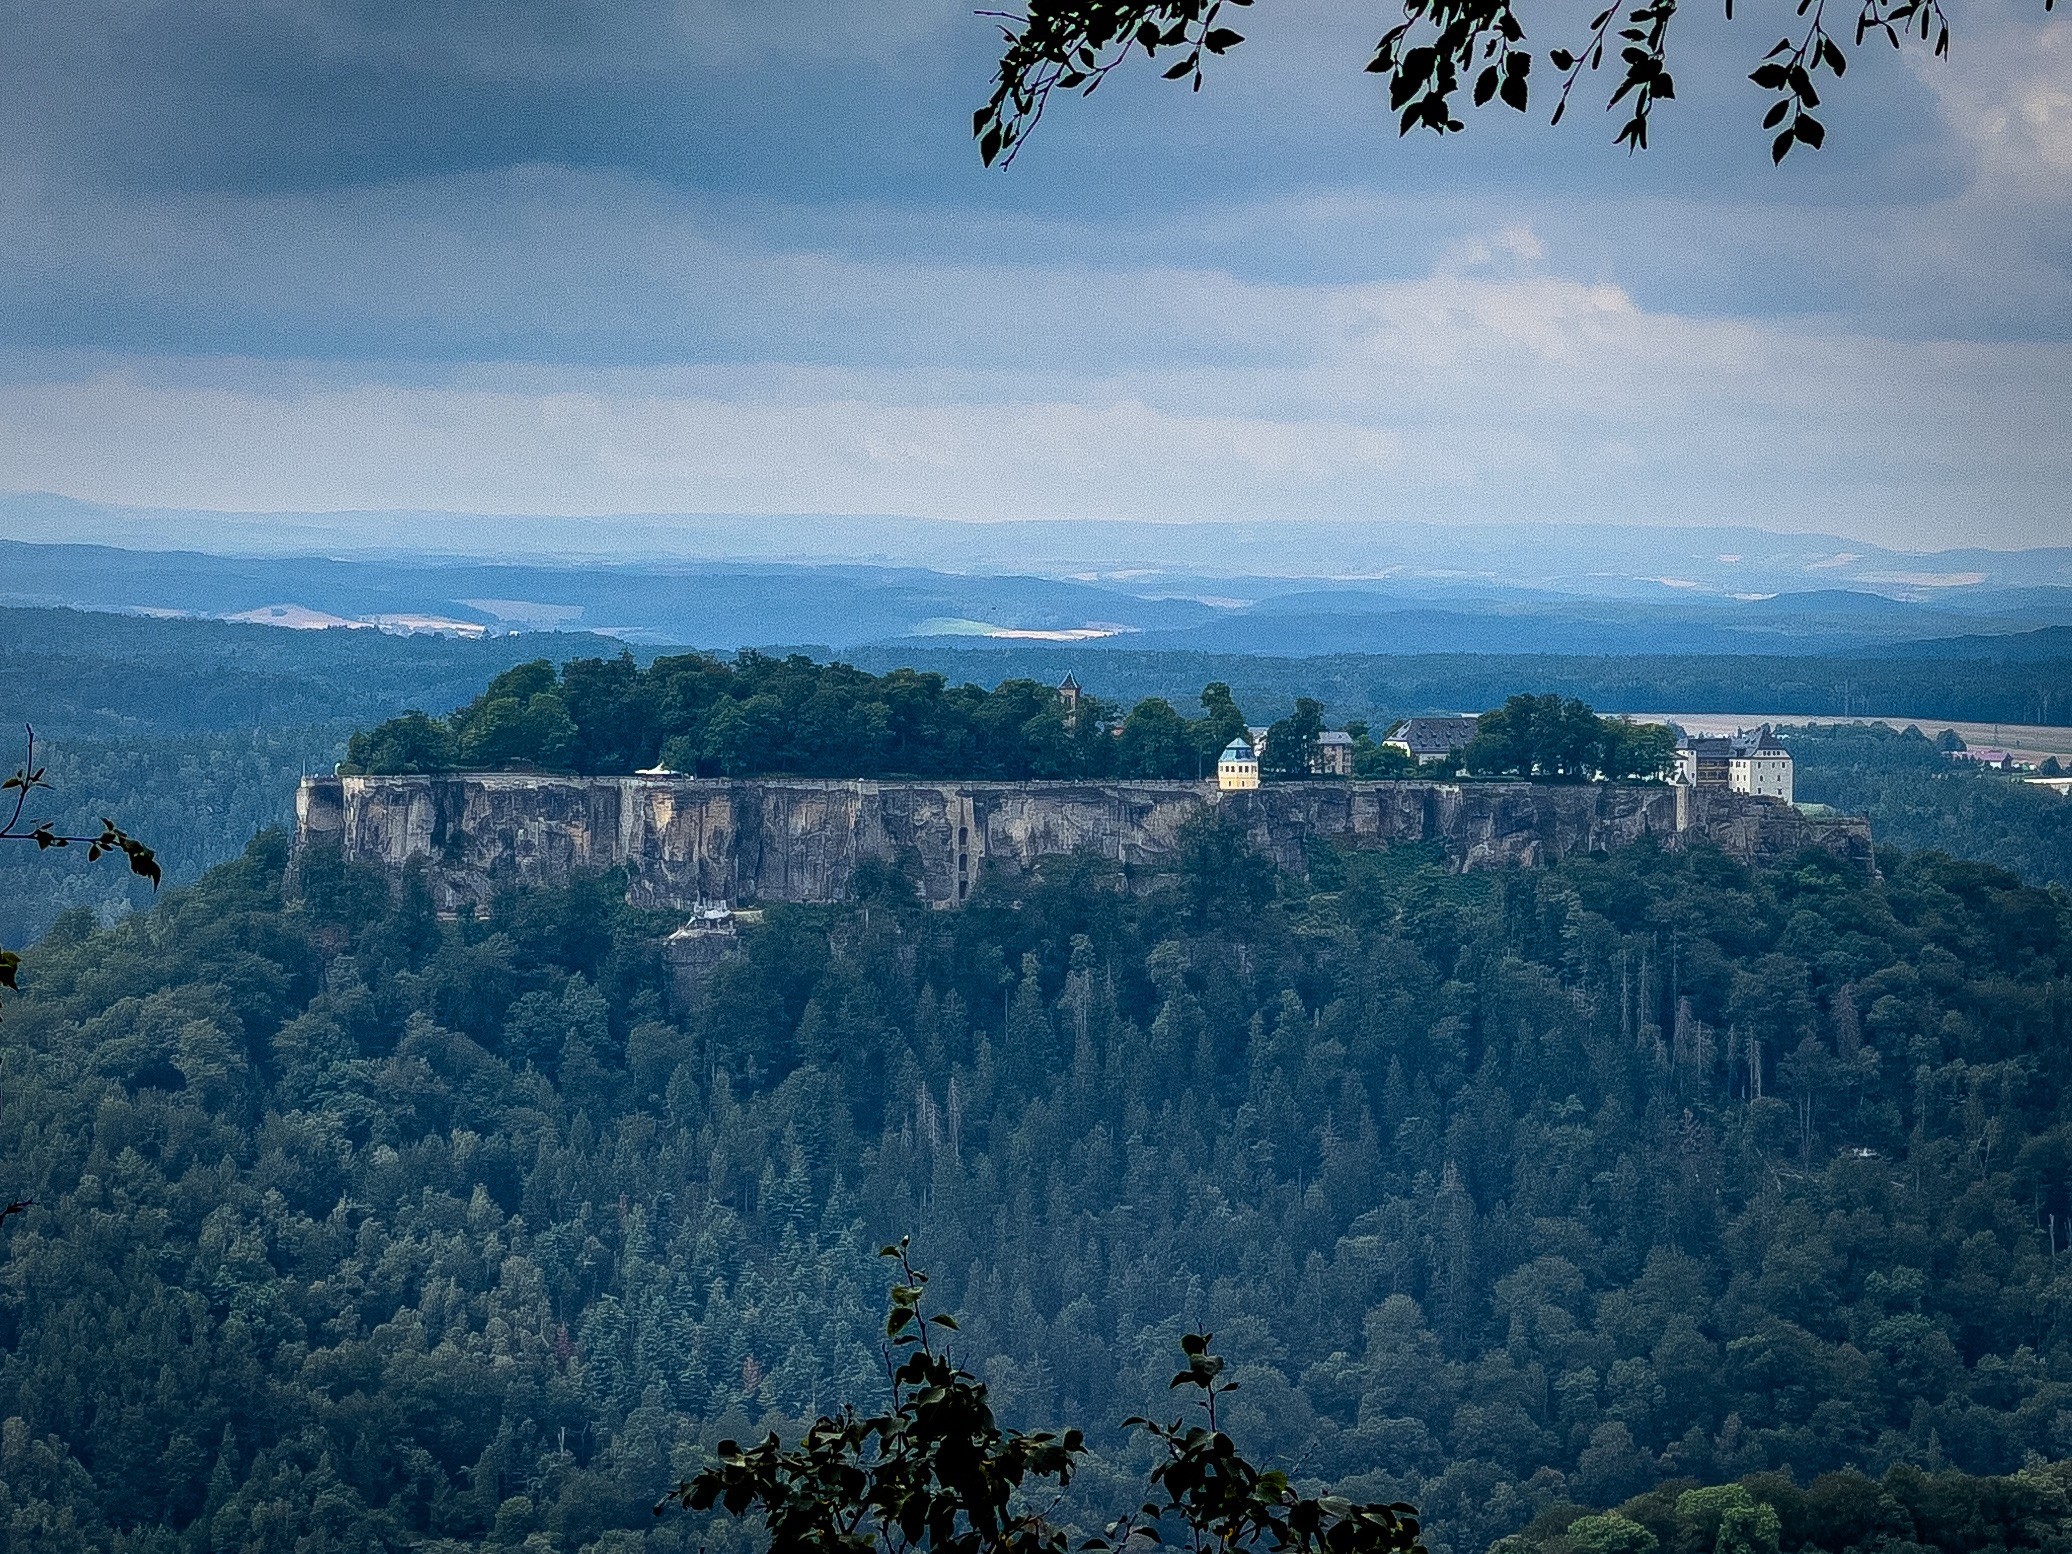 A distant view of a fortress built on a forested plateau, surrounded by lush greenery and under a cloudy sky.